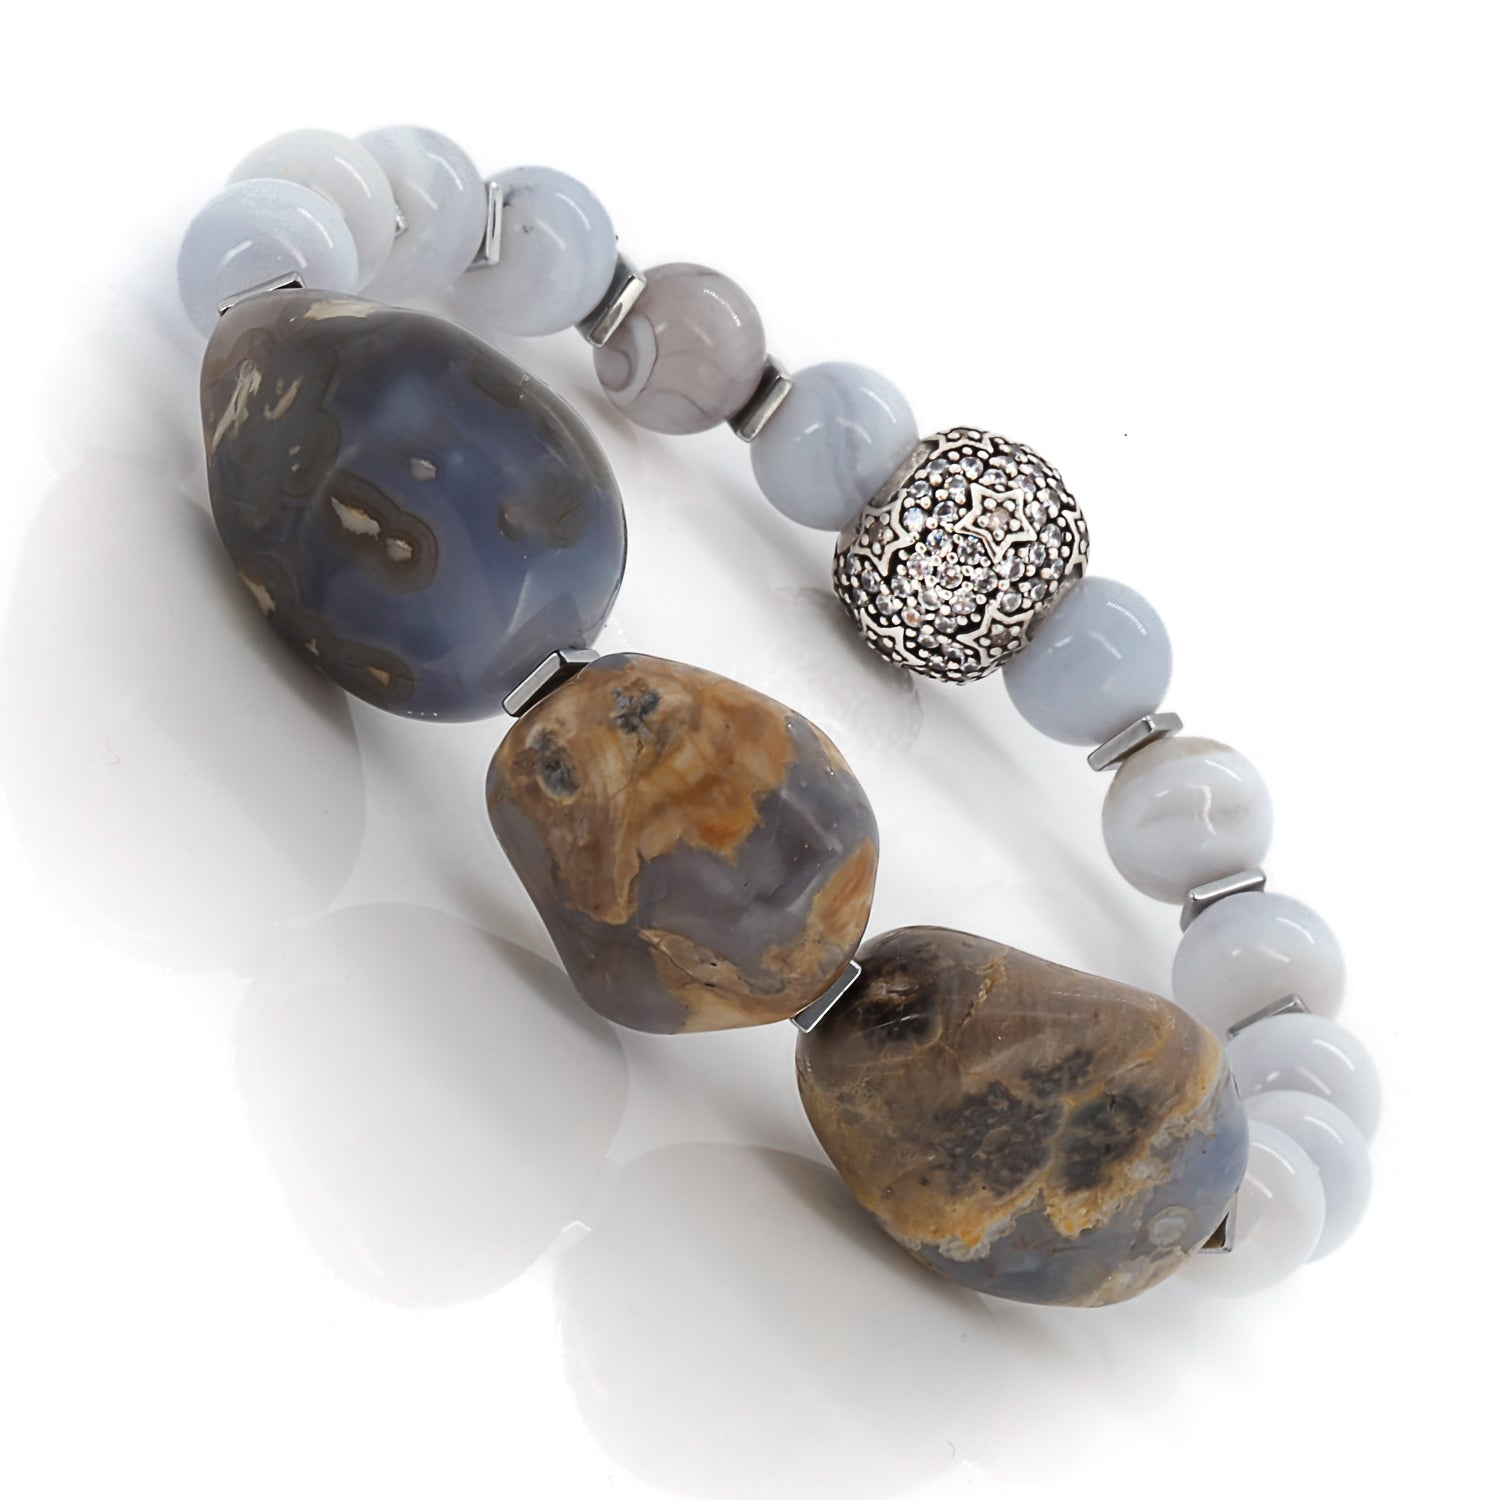 Large Lace Agate Beads - Intricate patterns resembling nature's canvas.